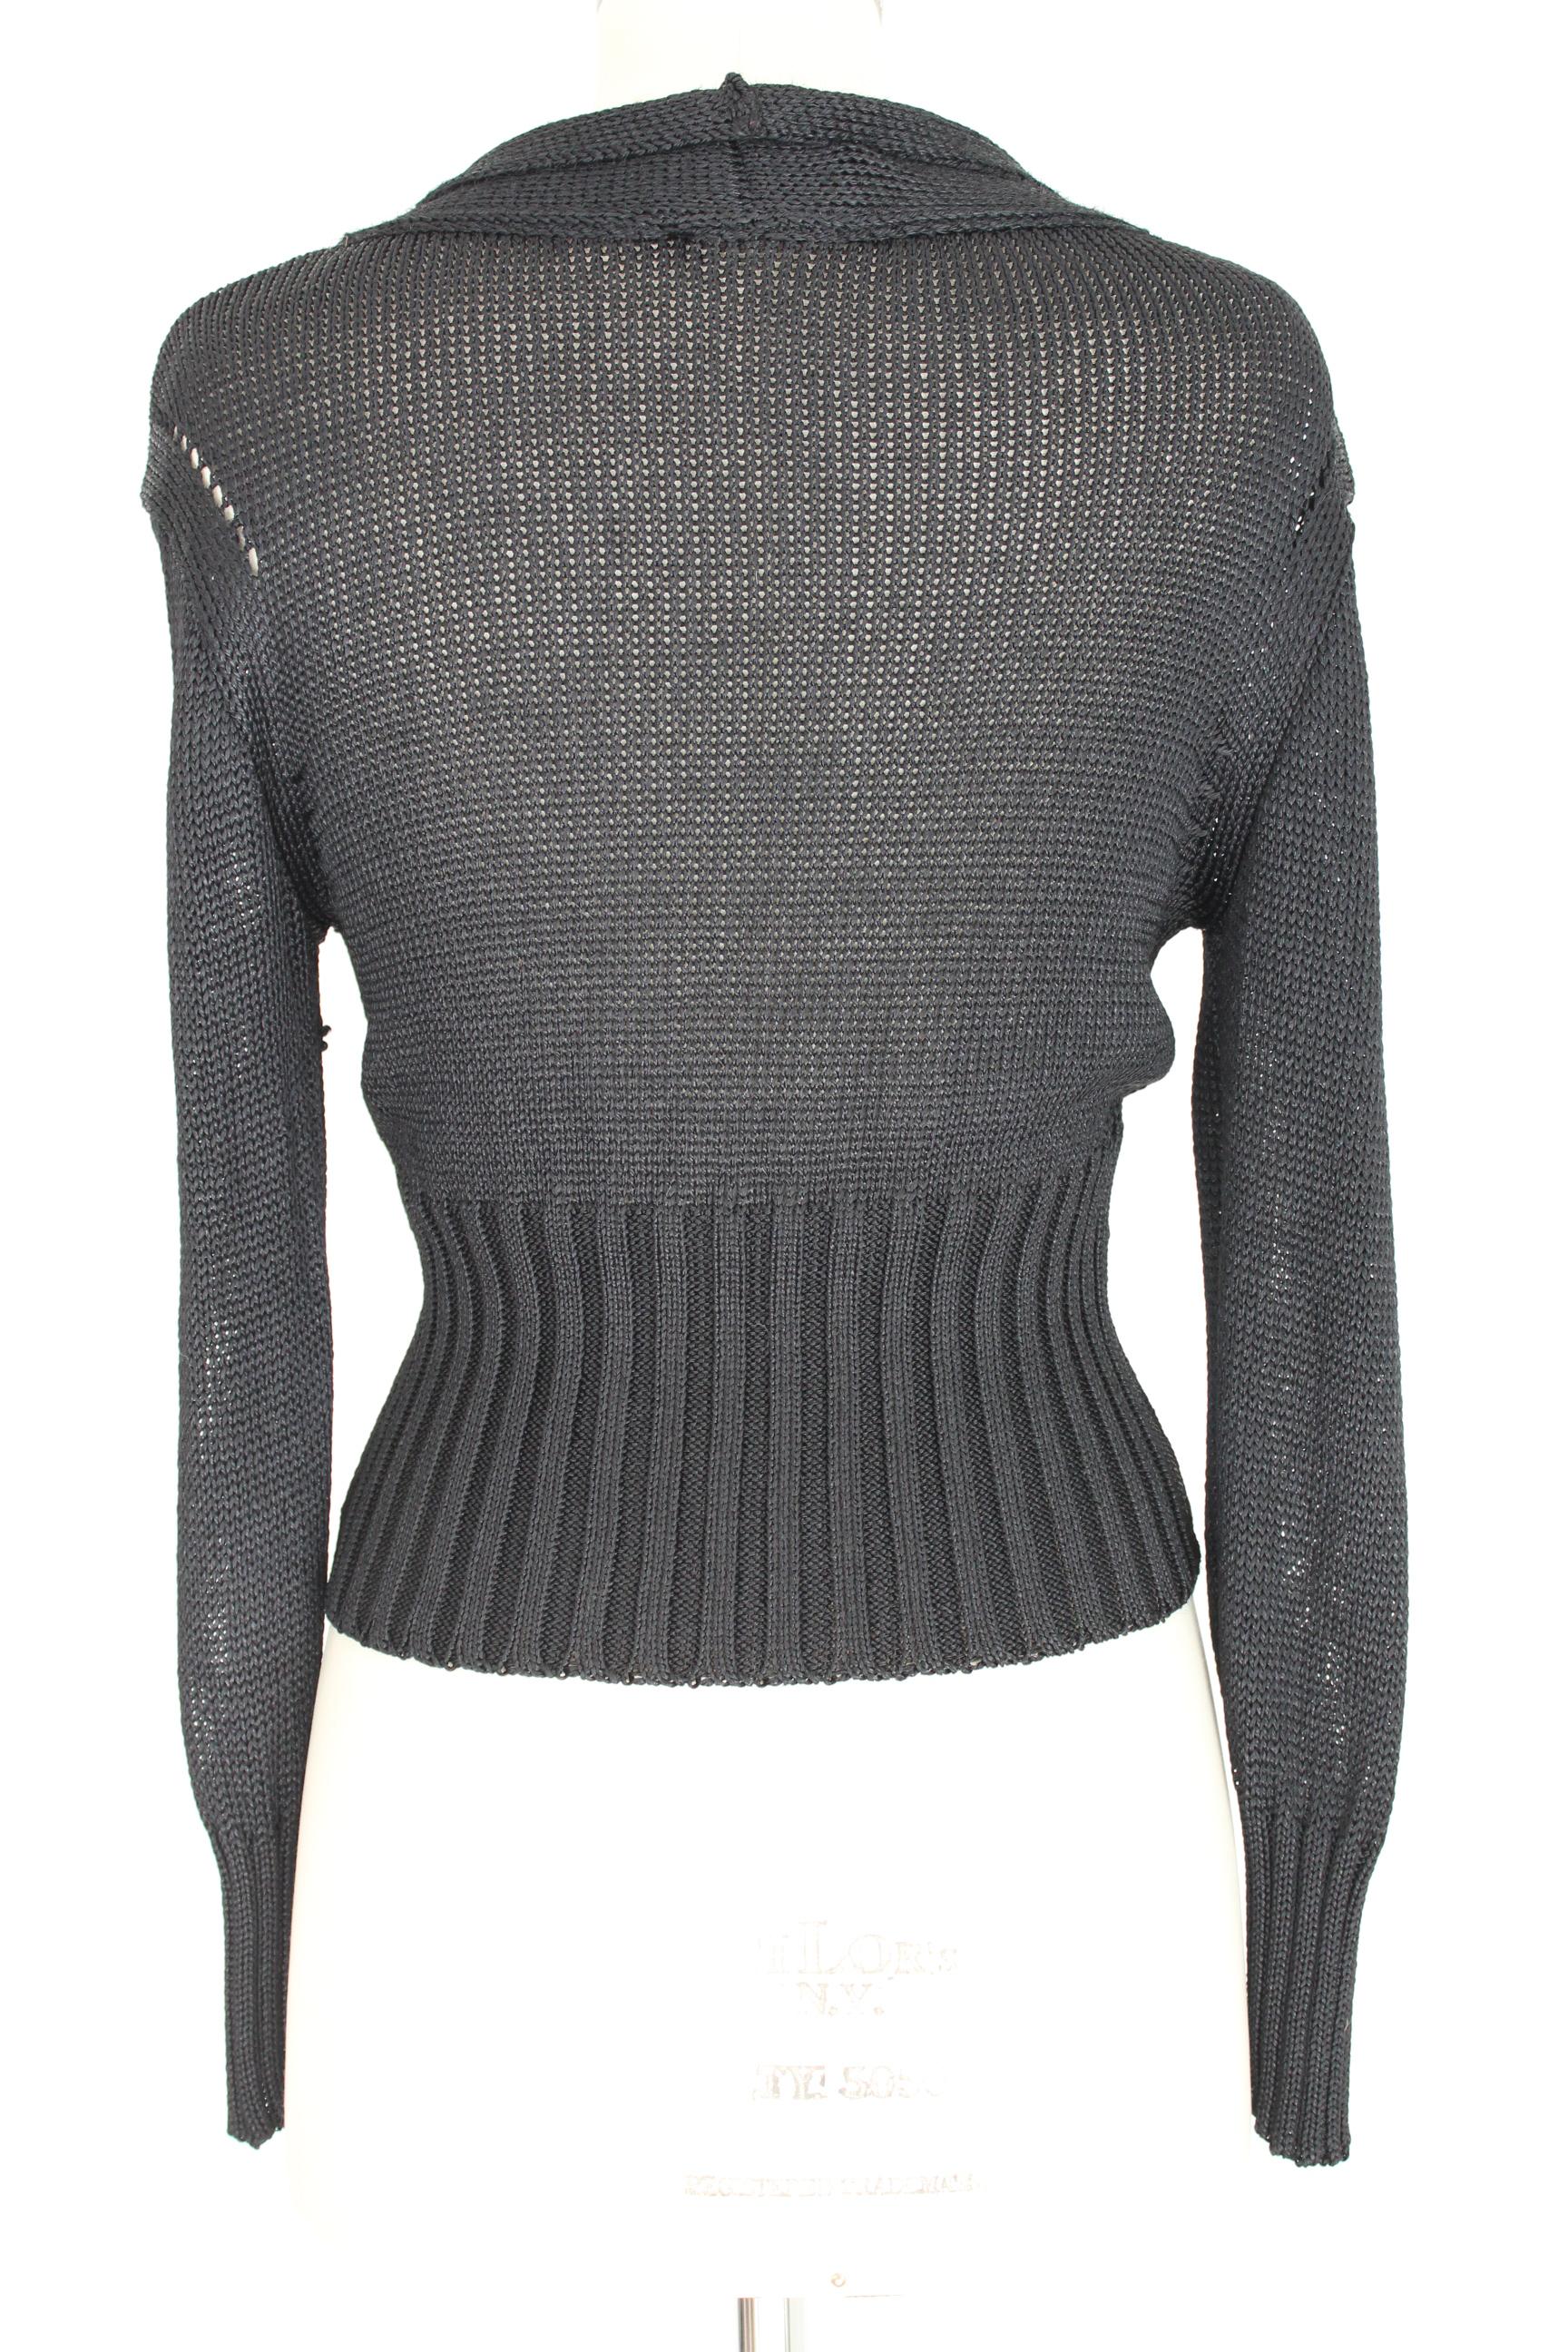 Ann Demeulemeester 90s vintage women's sweater. Cardigan color black openwork, deep neckline. 100% cotton . Short model on the sides. Made in Italy. Excellent vintage conditions.

Size: 40 It 6 Us 8 Uk

Shoulder: 40 cm

Bust/Chest: 45 cm

Sleeve: 60